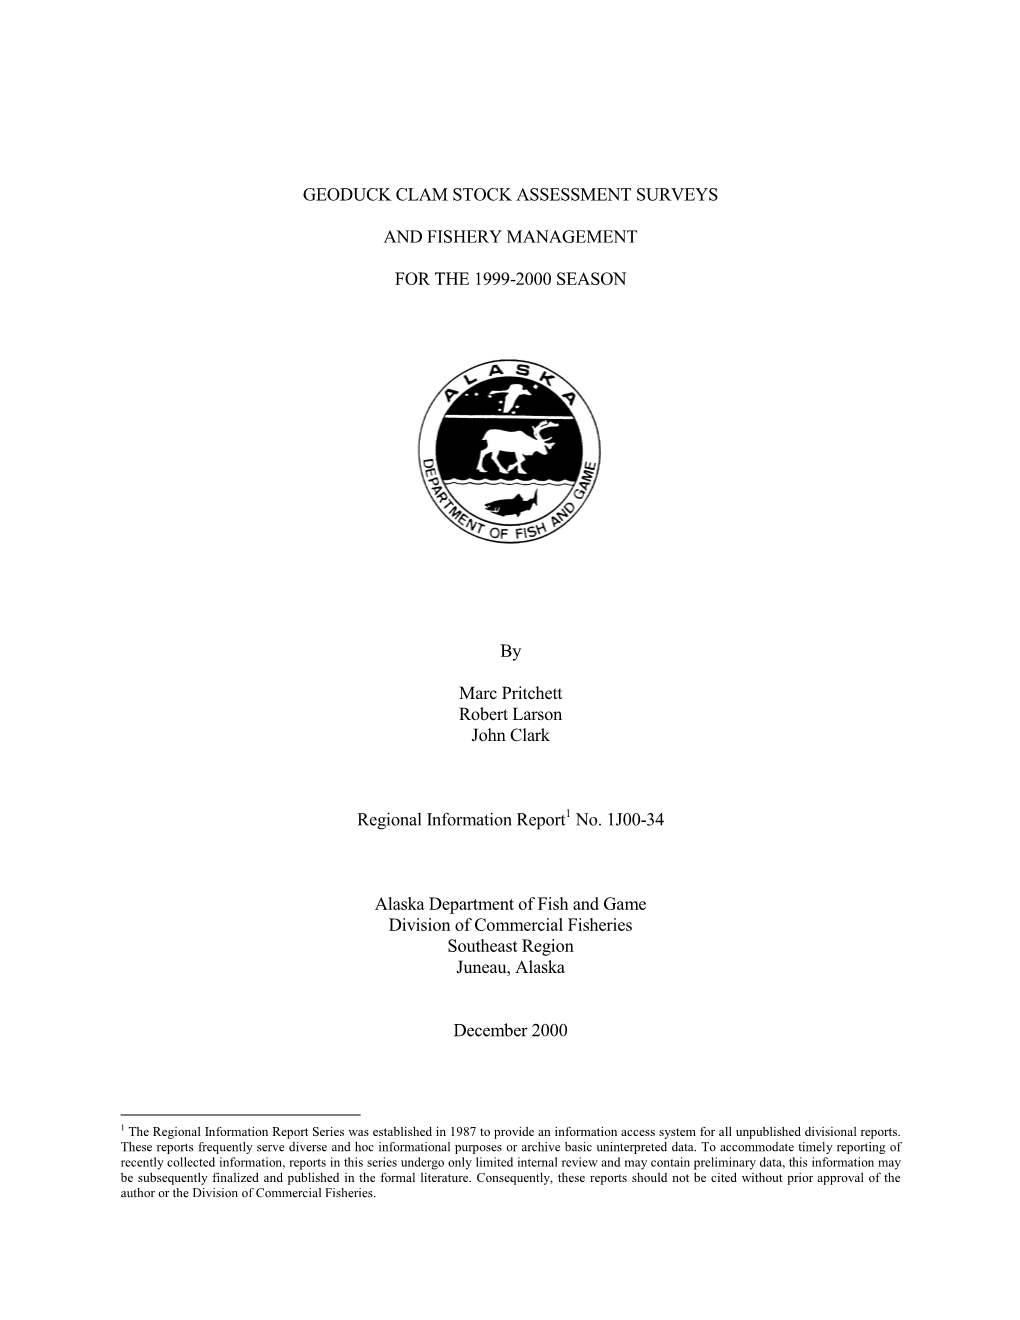 Geoduck Clam Stock Assessment Surveys and Fishery Management for the 1999-2000 Season